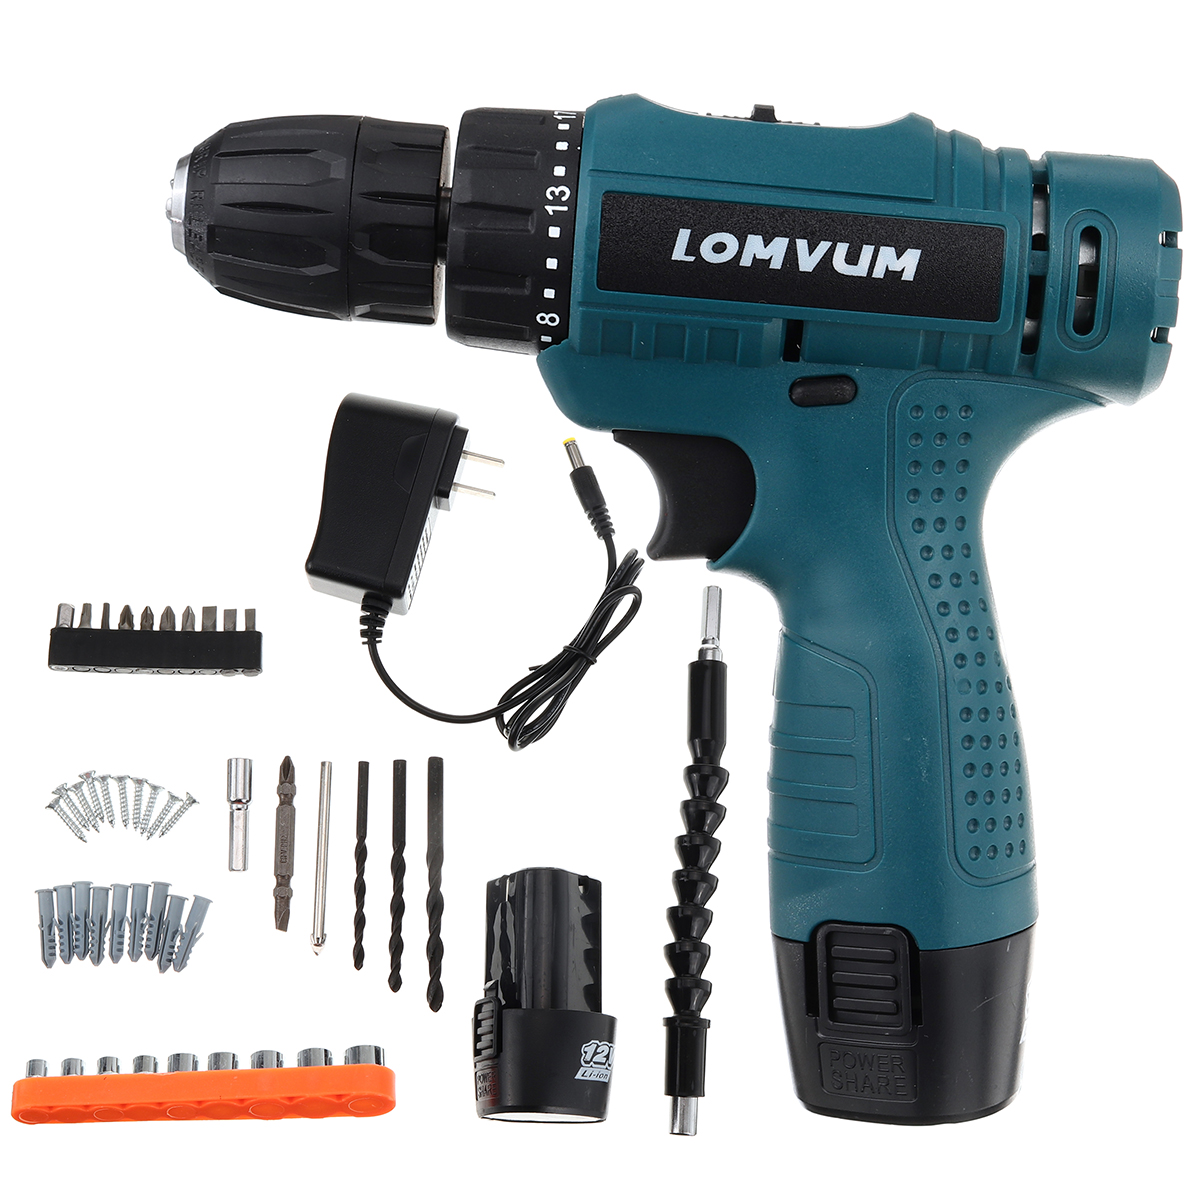 Multifunctional-Electric-Drill-211-Torque-Screwdriver-12V-Rechargeable-Dual-Speed-Power-Tools-W-2pcs-1786346-10